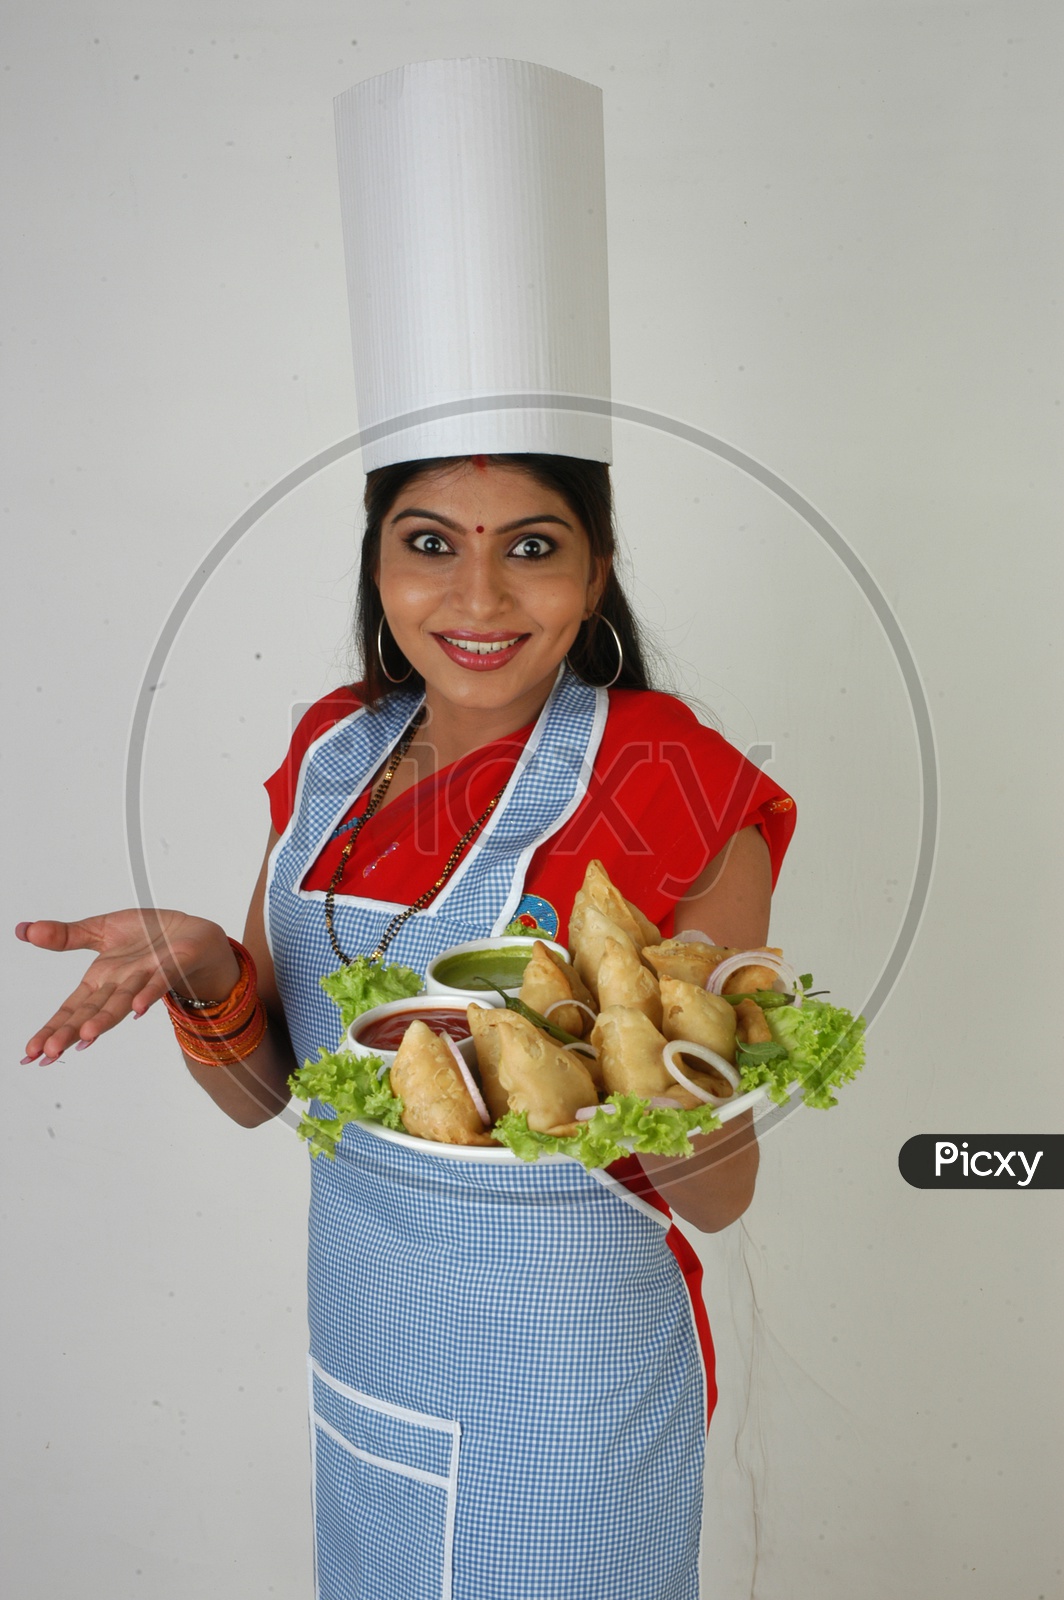 Image Of An Indian Woman Chef In Kitchen Apron And Cap Holding Samosas Plate With An Expression 